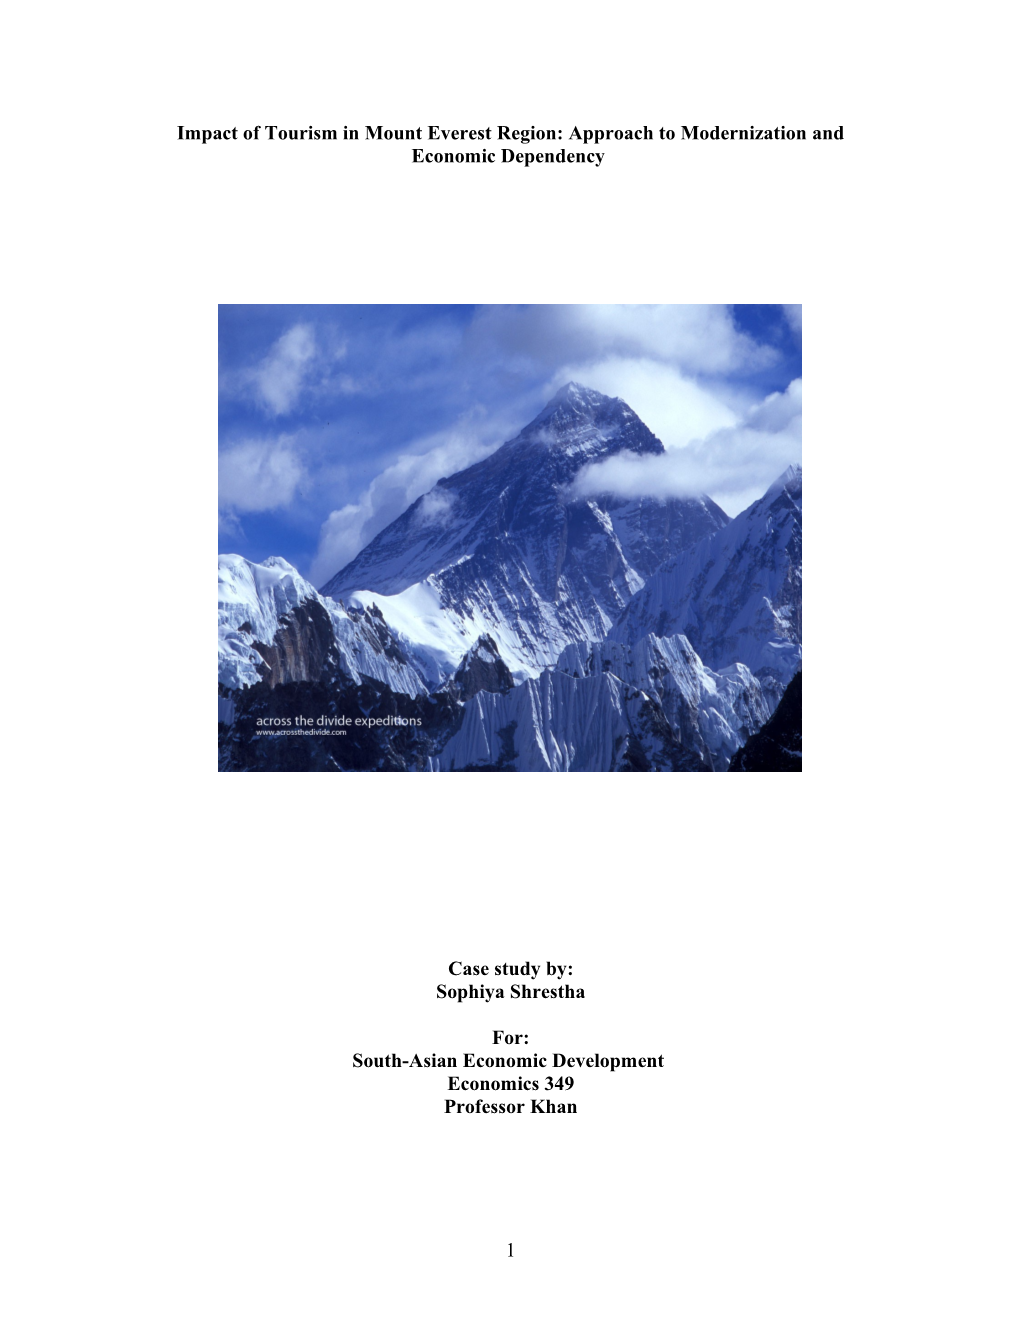 Impact of Tourism in Mount Everest Region: Approach to Modernization and Economic Dependency